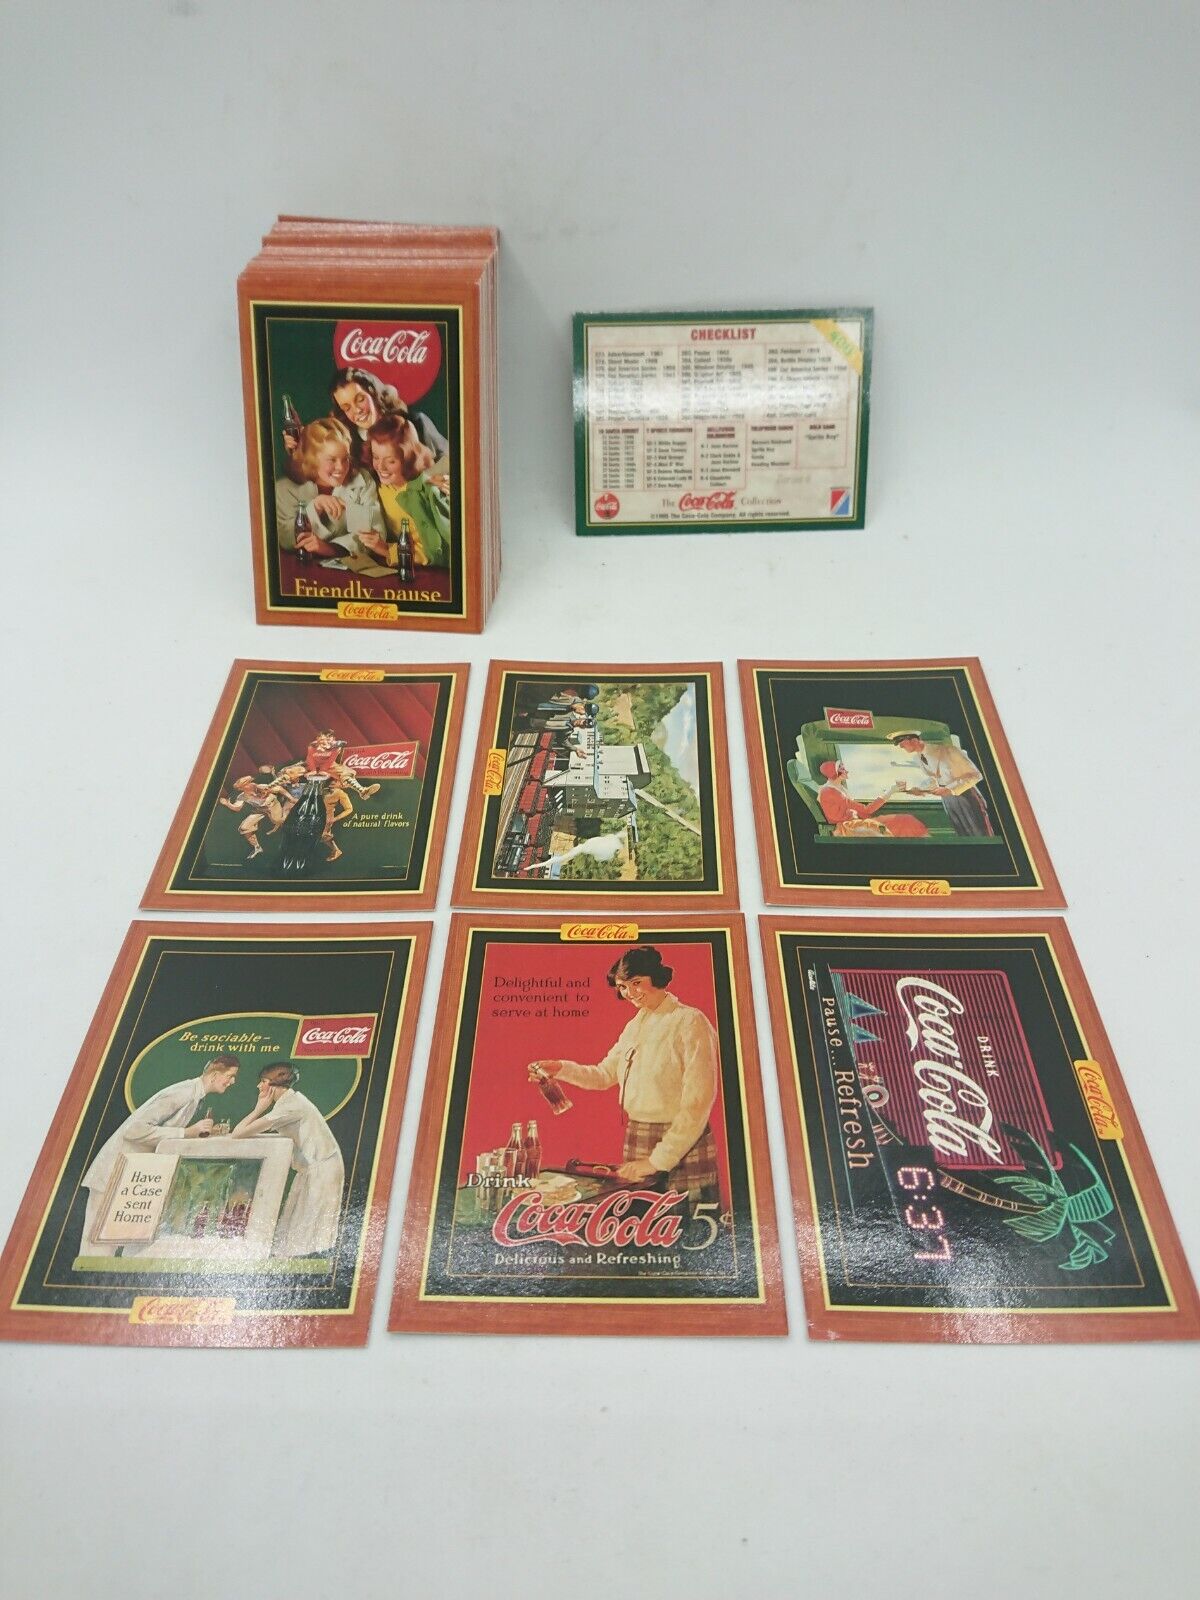 COCA-COLA SERIES 4 Collect-A-Card 1995 Complete Trading Card Set (#301-#400)